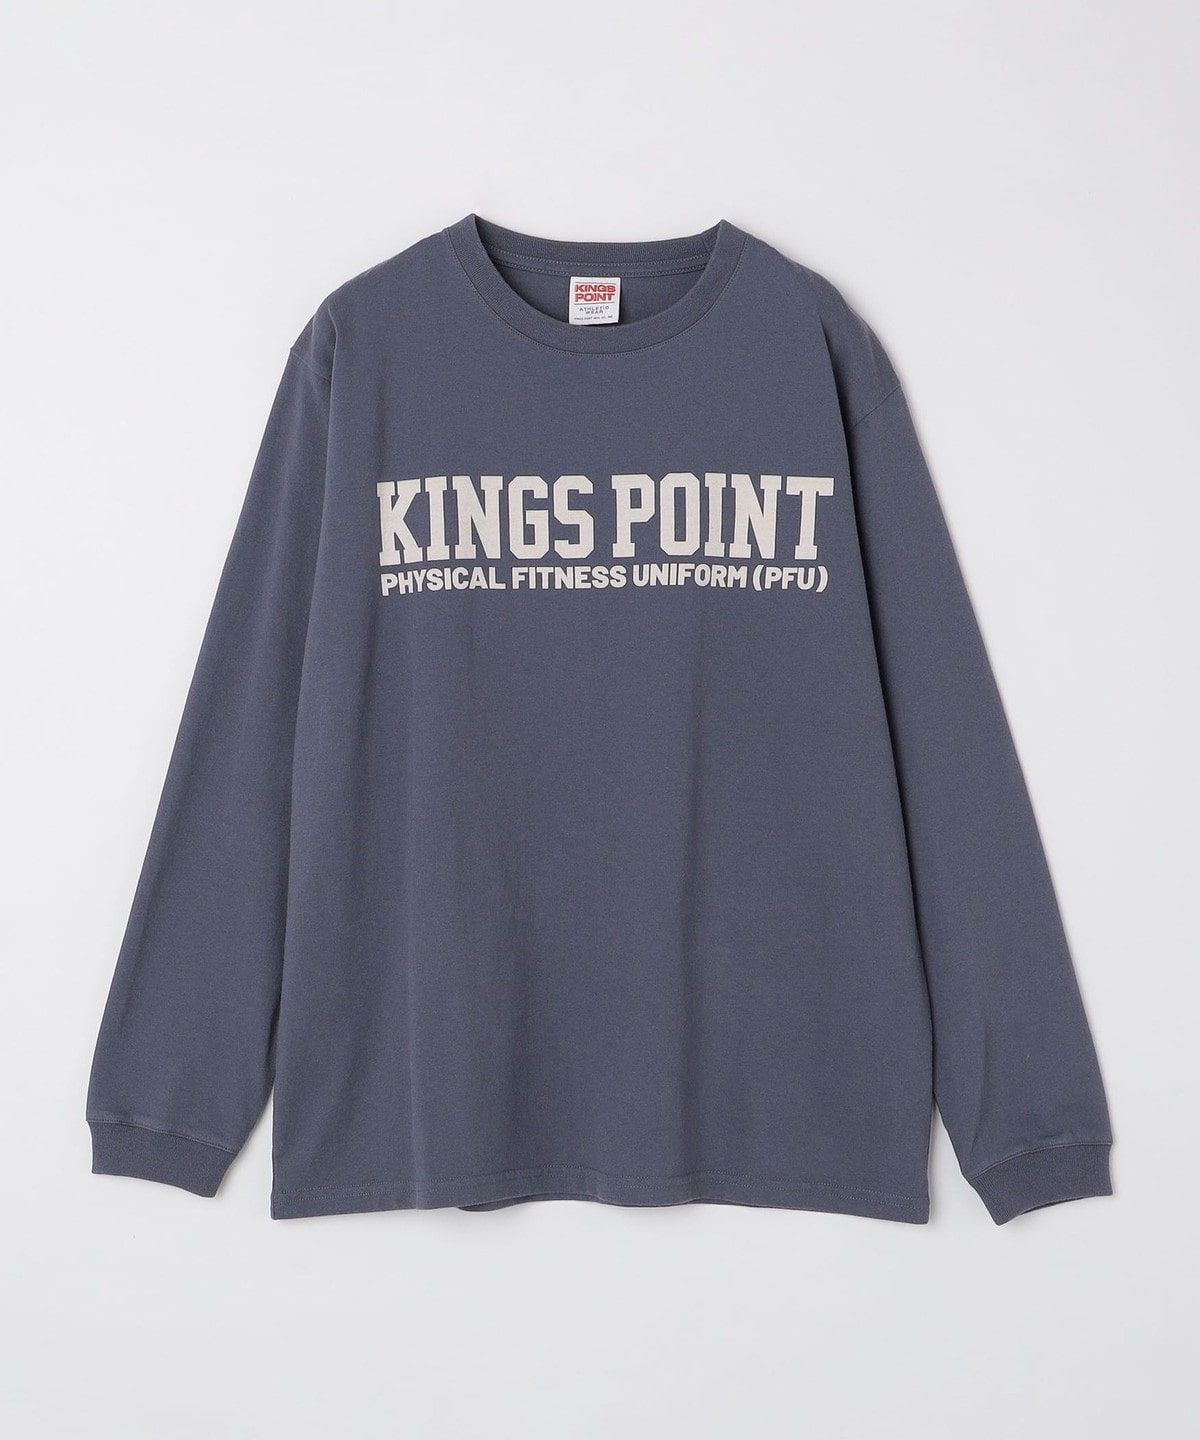 KINGS POINT: ロゴ プリント 長袖 Tシャツ: Tシャツ/カットソー SHIPS